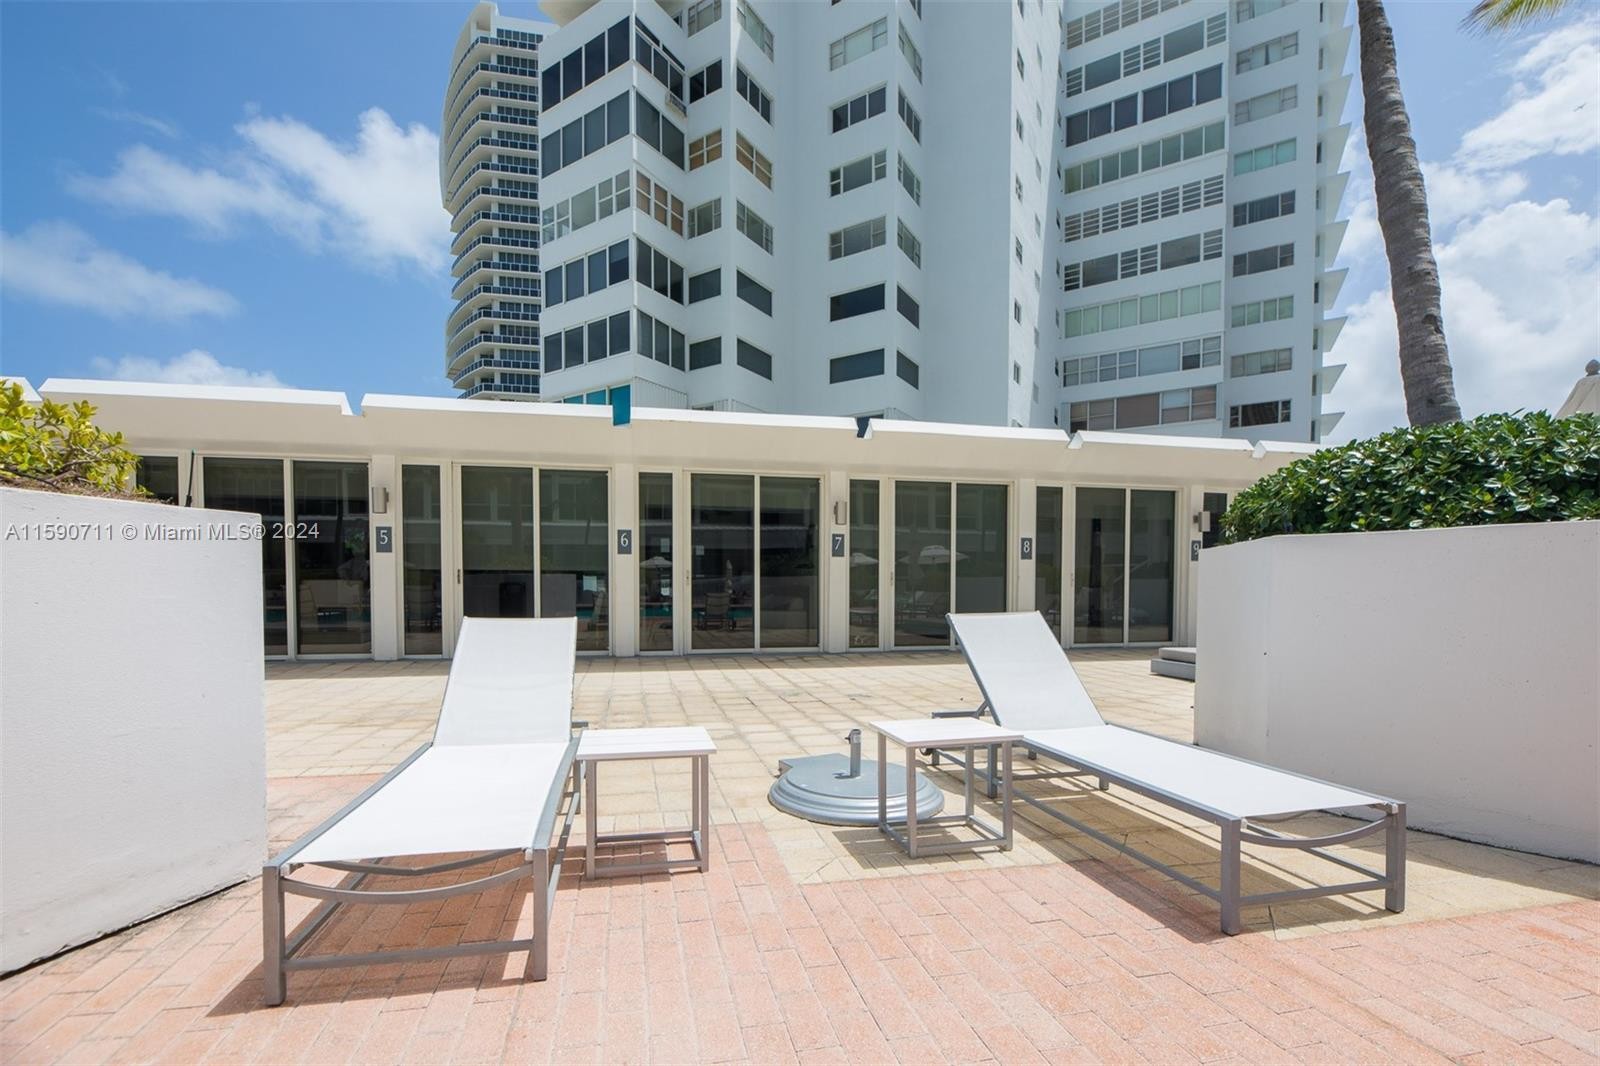 36. 10275 Collins Ave